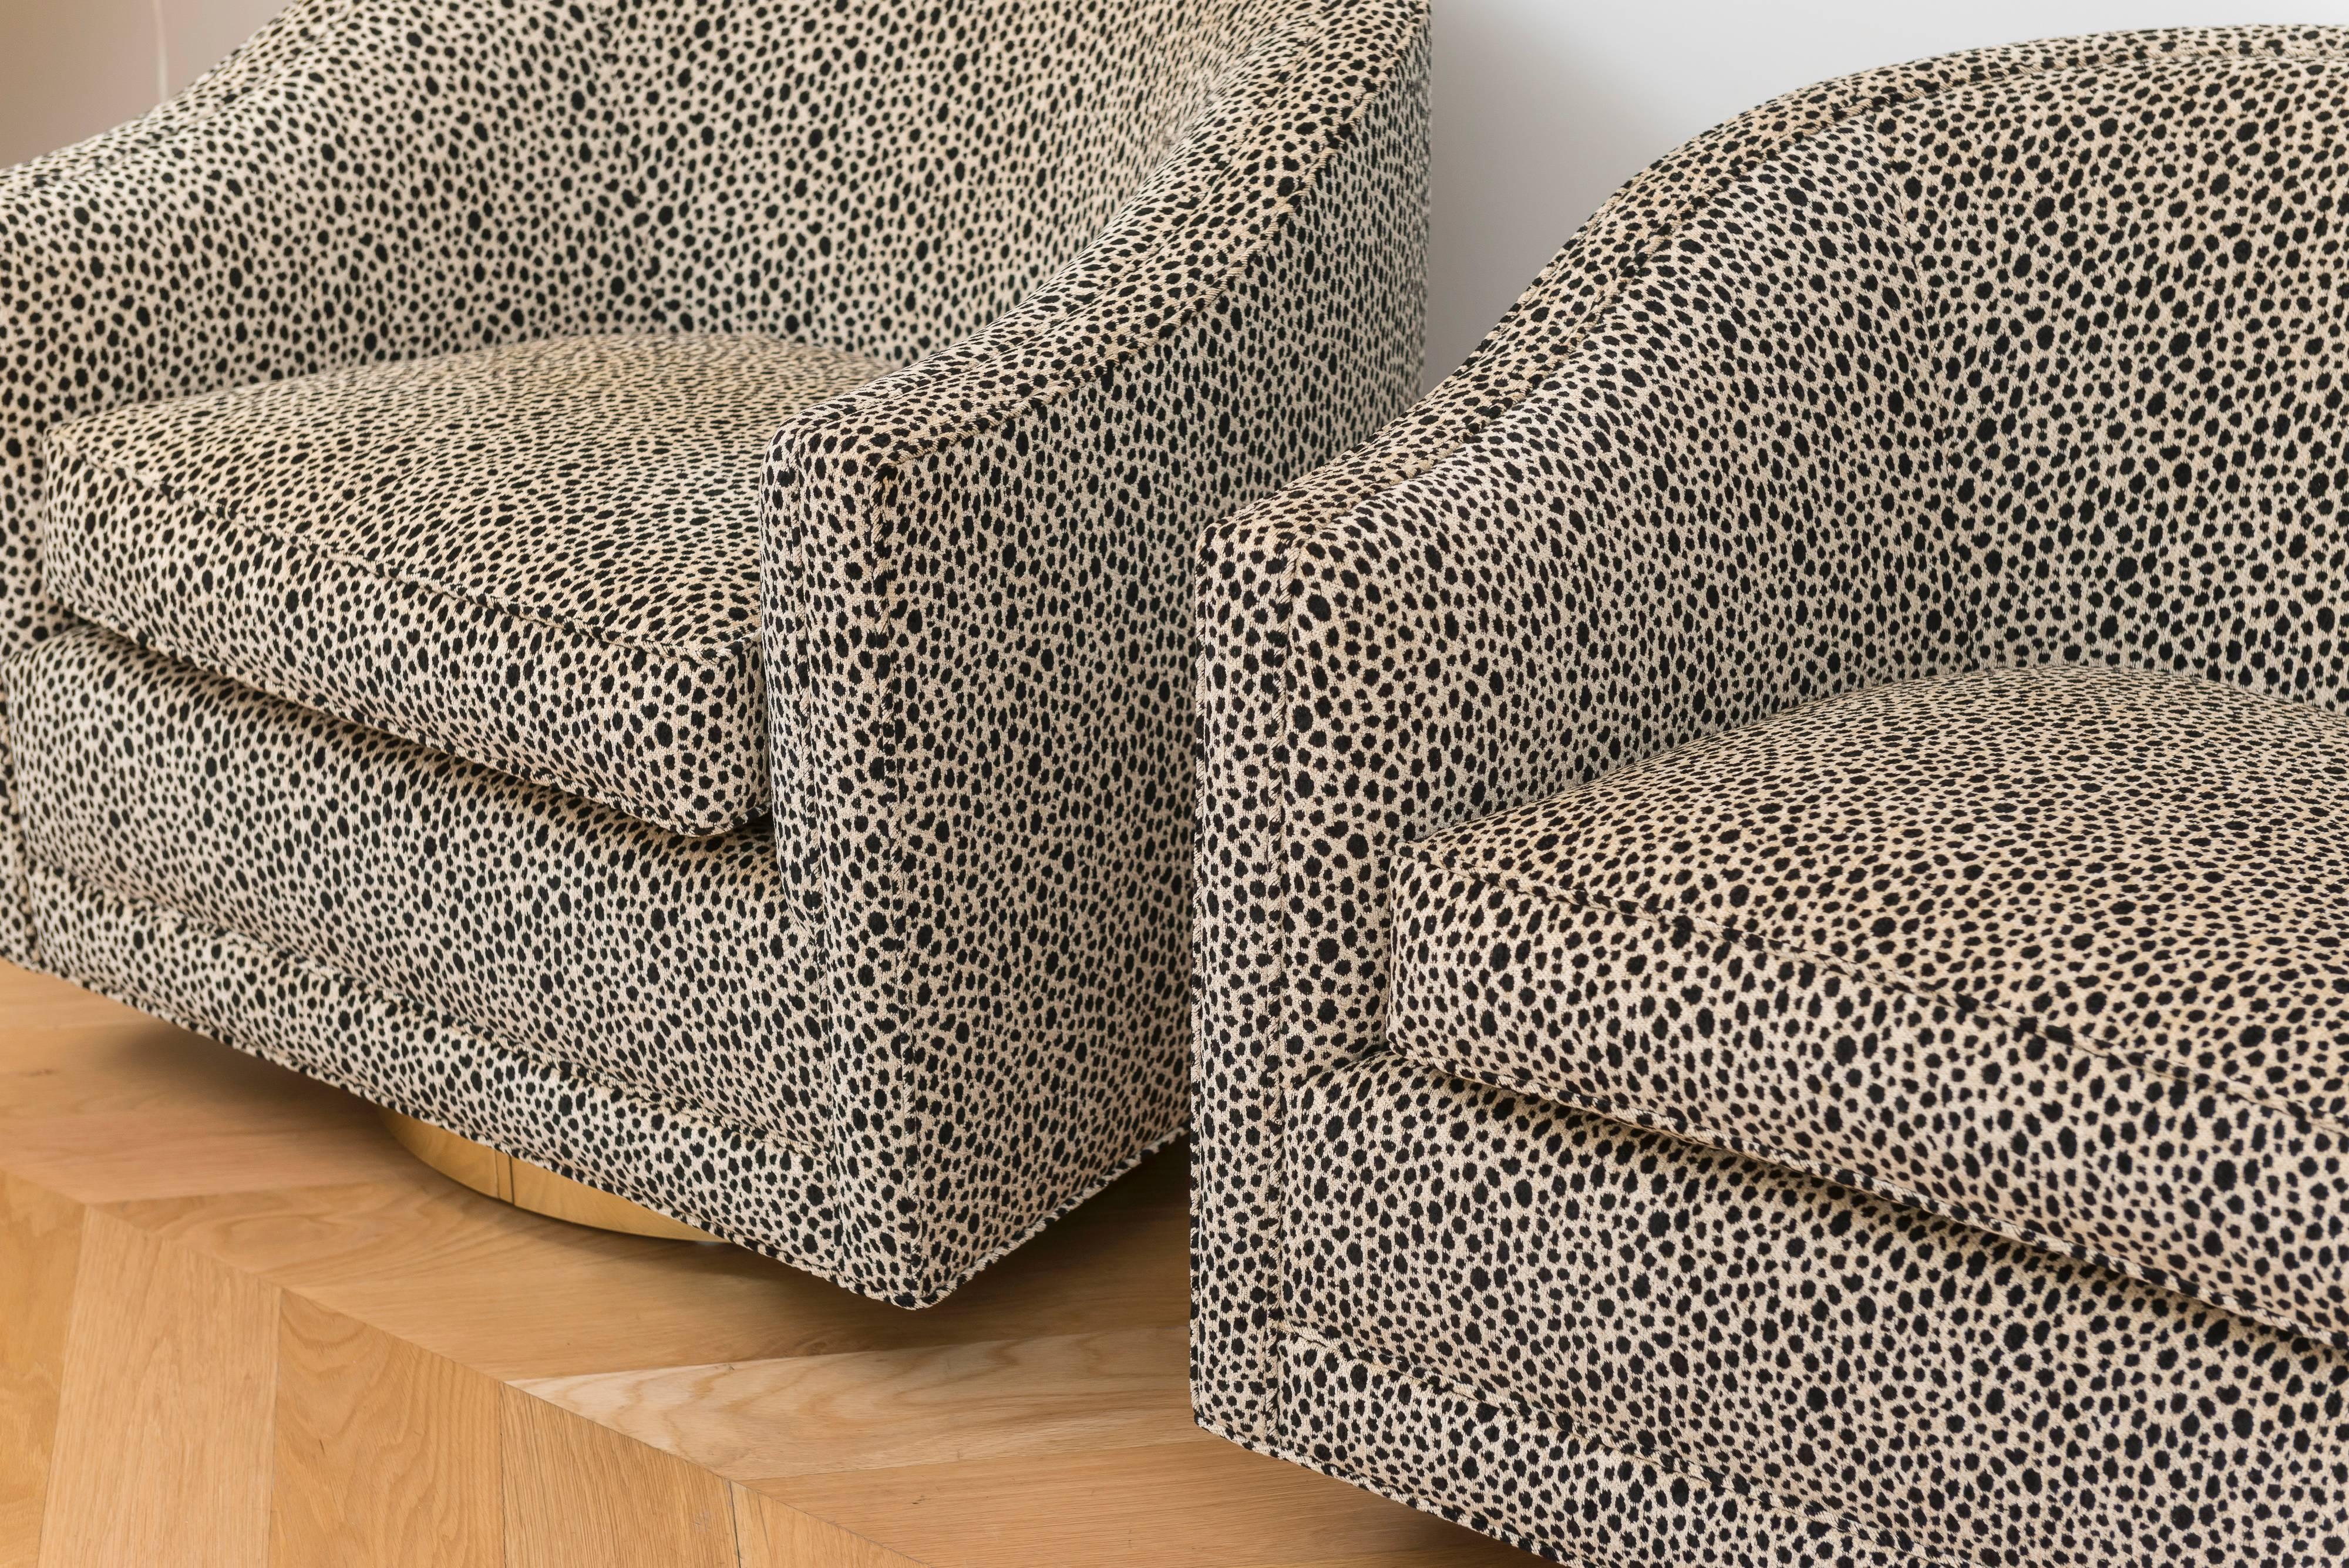 Great pair of Milo Baughman swivel armchairs with a brass plinth base, reupholstered in a faux black and white cheetah.